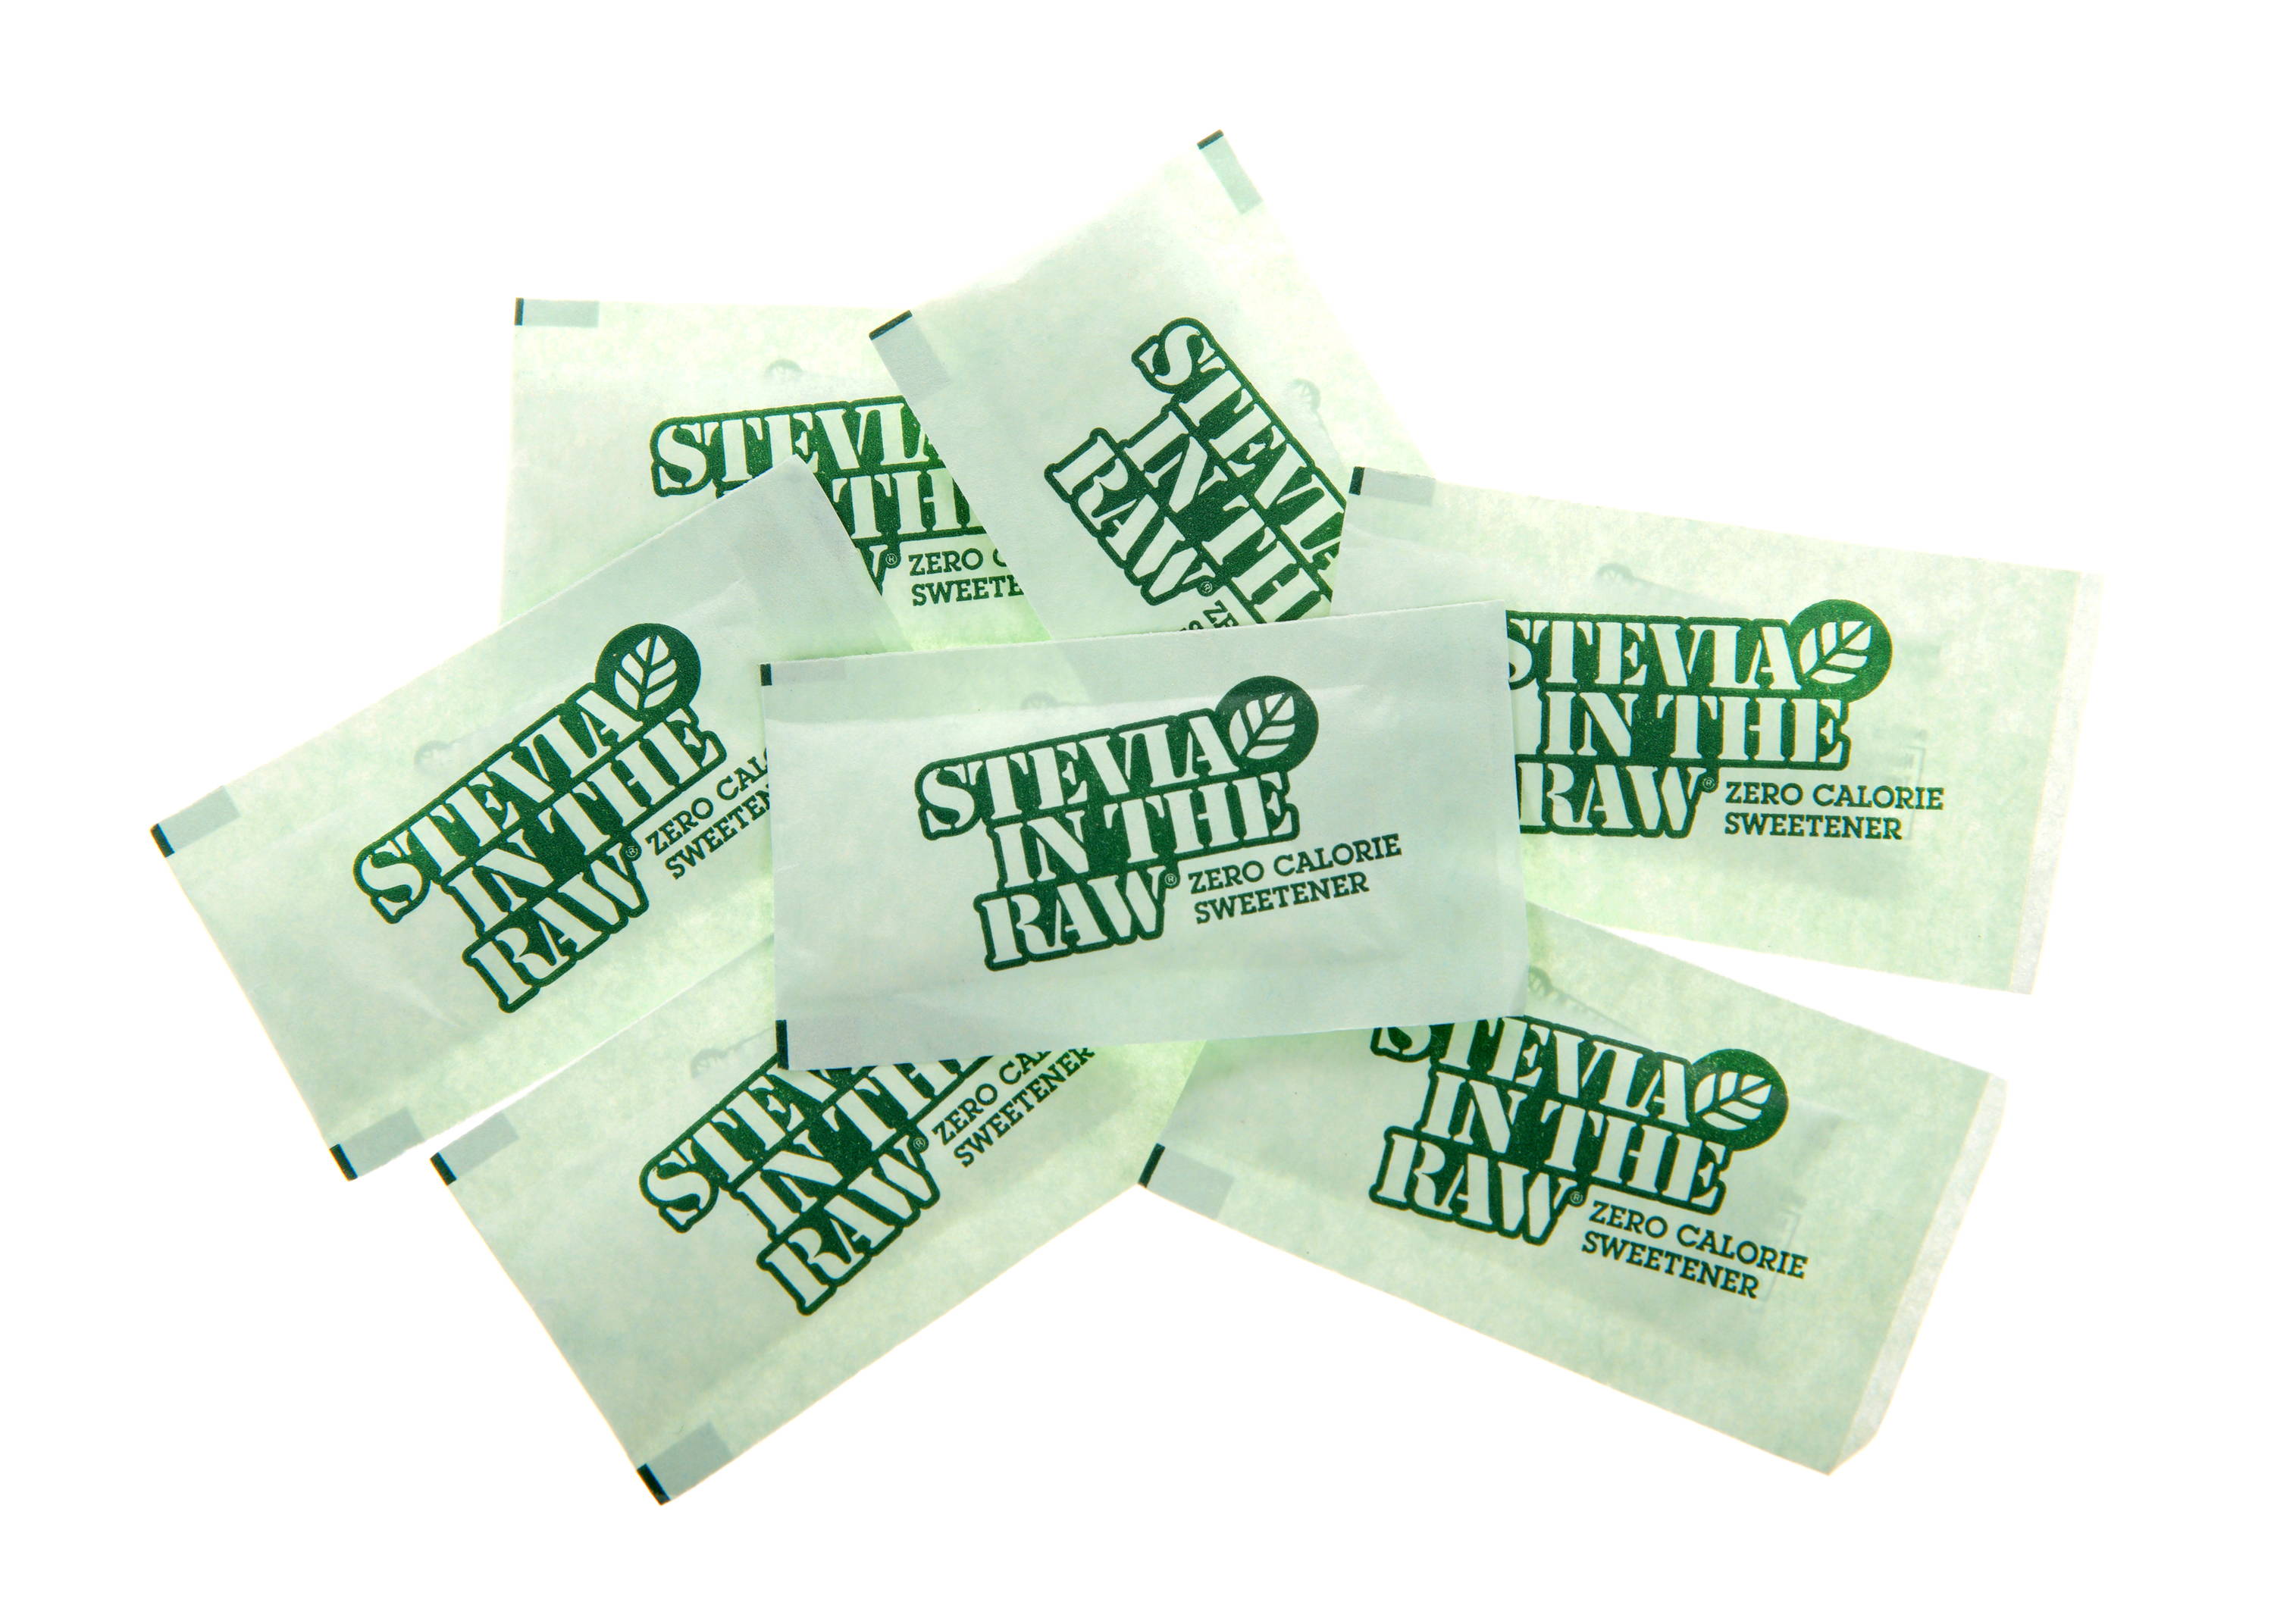 Packets of Stevia in the Raw